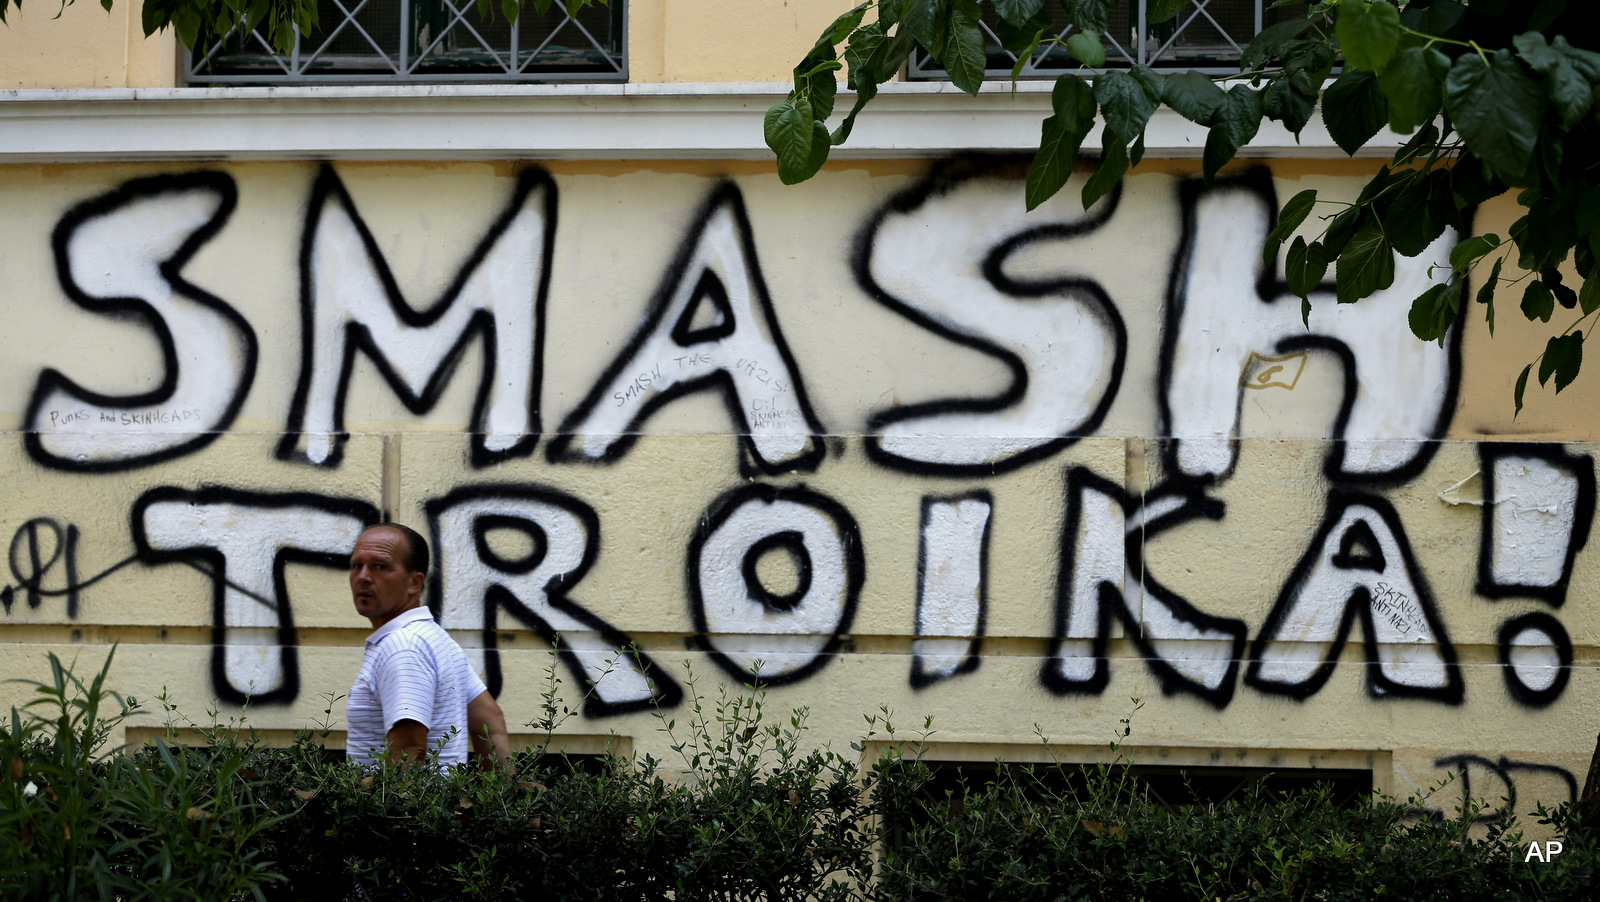 A pedestrian passes graffiti referring to the officials from the European Union, European Central Bank and International Monetary Fund, together known as the troika, in Athens, Wednesday, July 29, 2015.